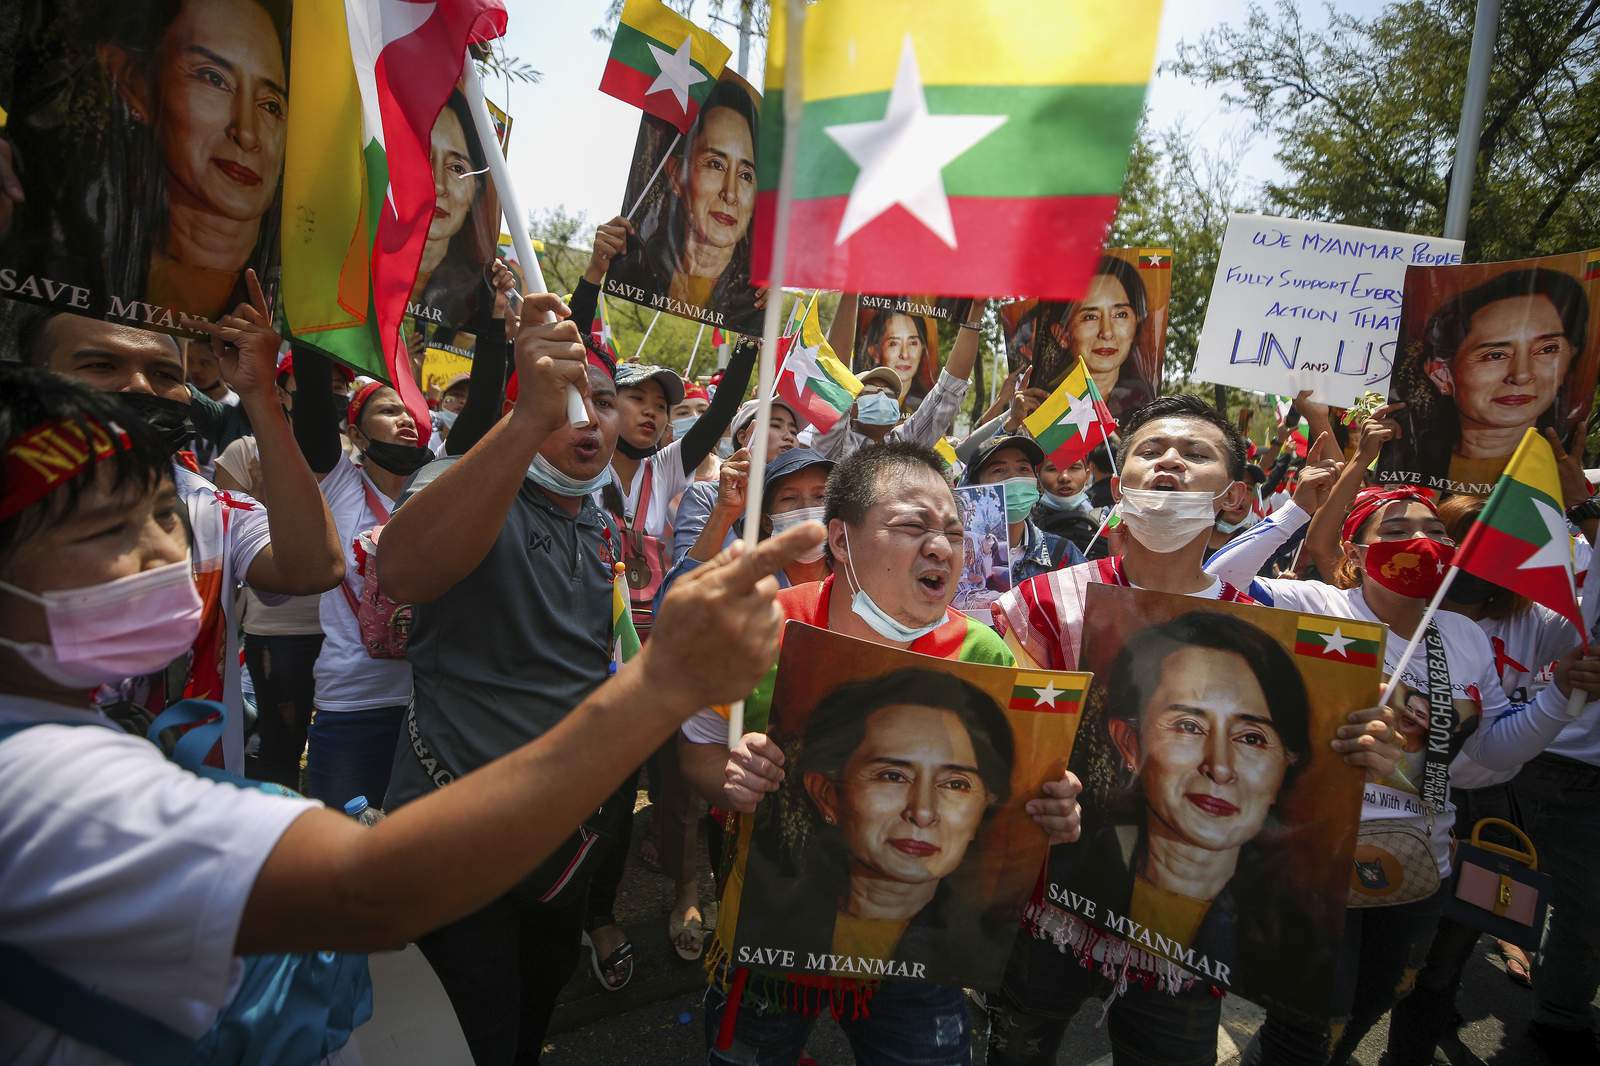 UN calls for reversal of Myanmar coup and condemns violence